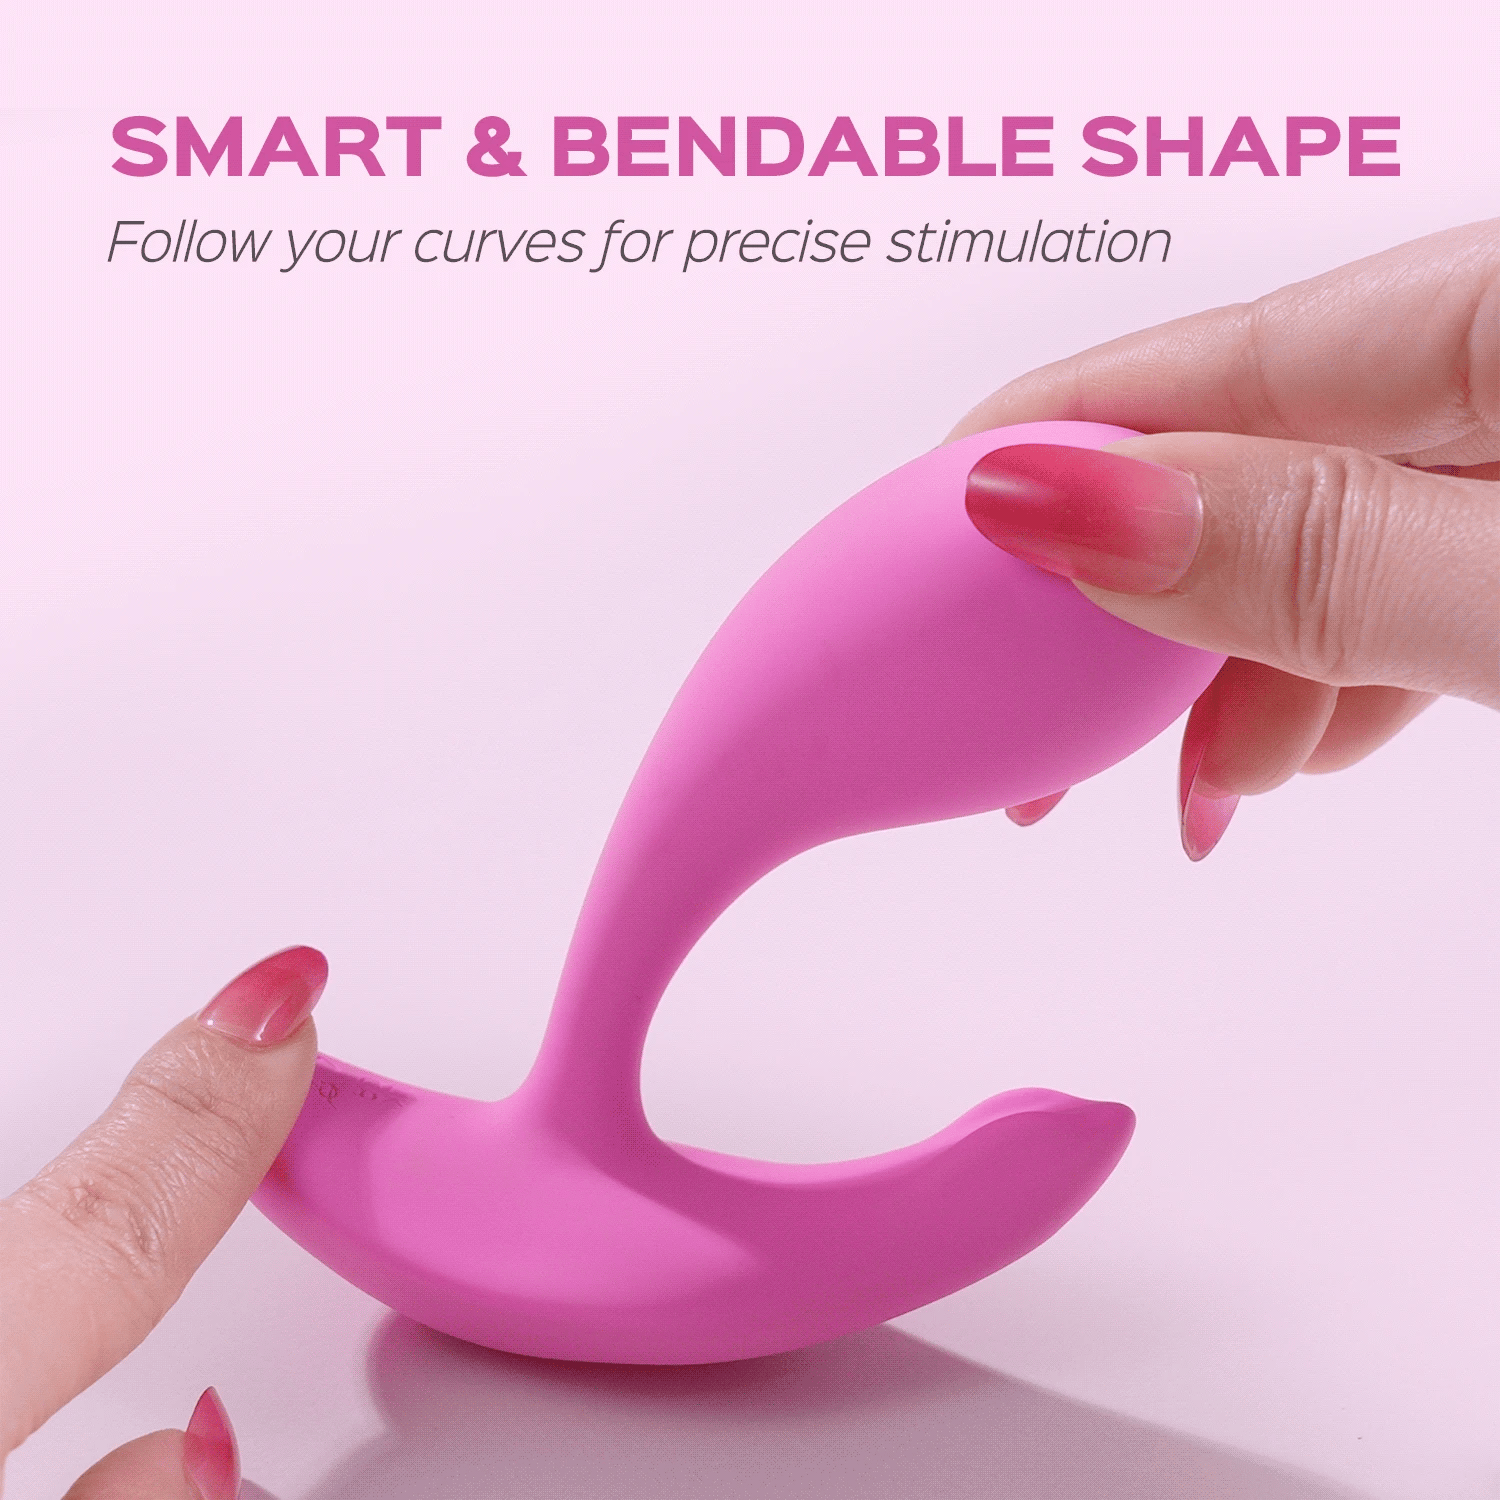 OLY 2 Pressure Sensing APP-enabled Wearable Clit & G Spot Vibrator - Honey Play Box Official